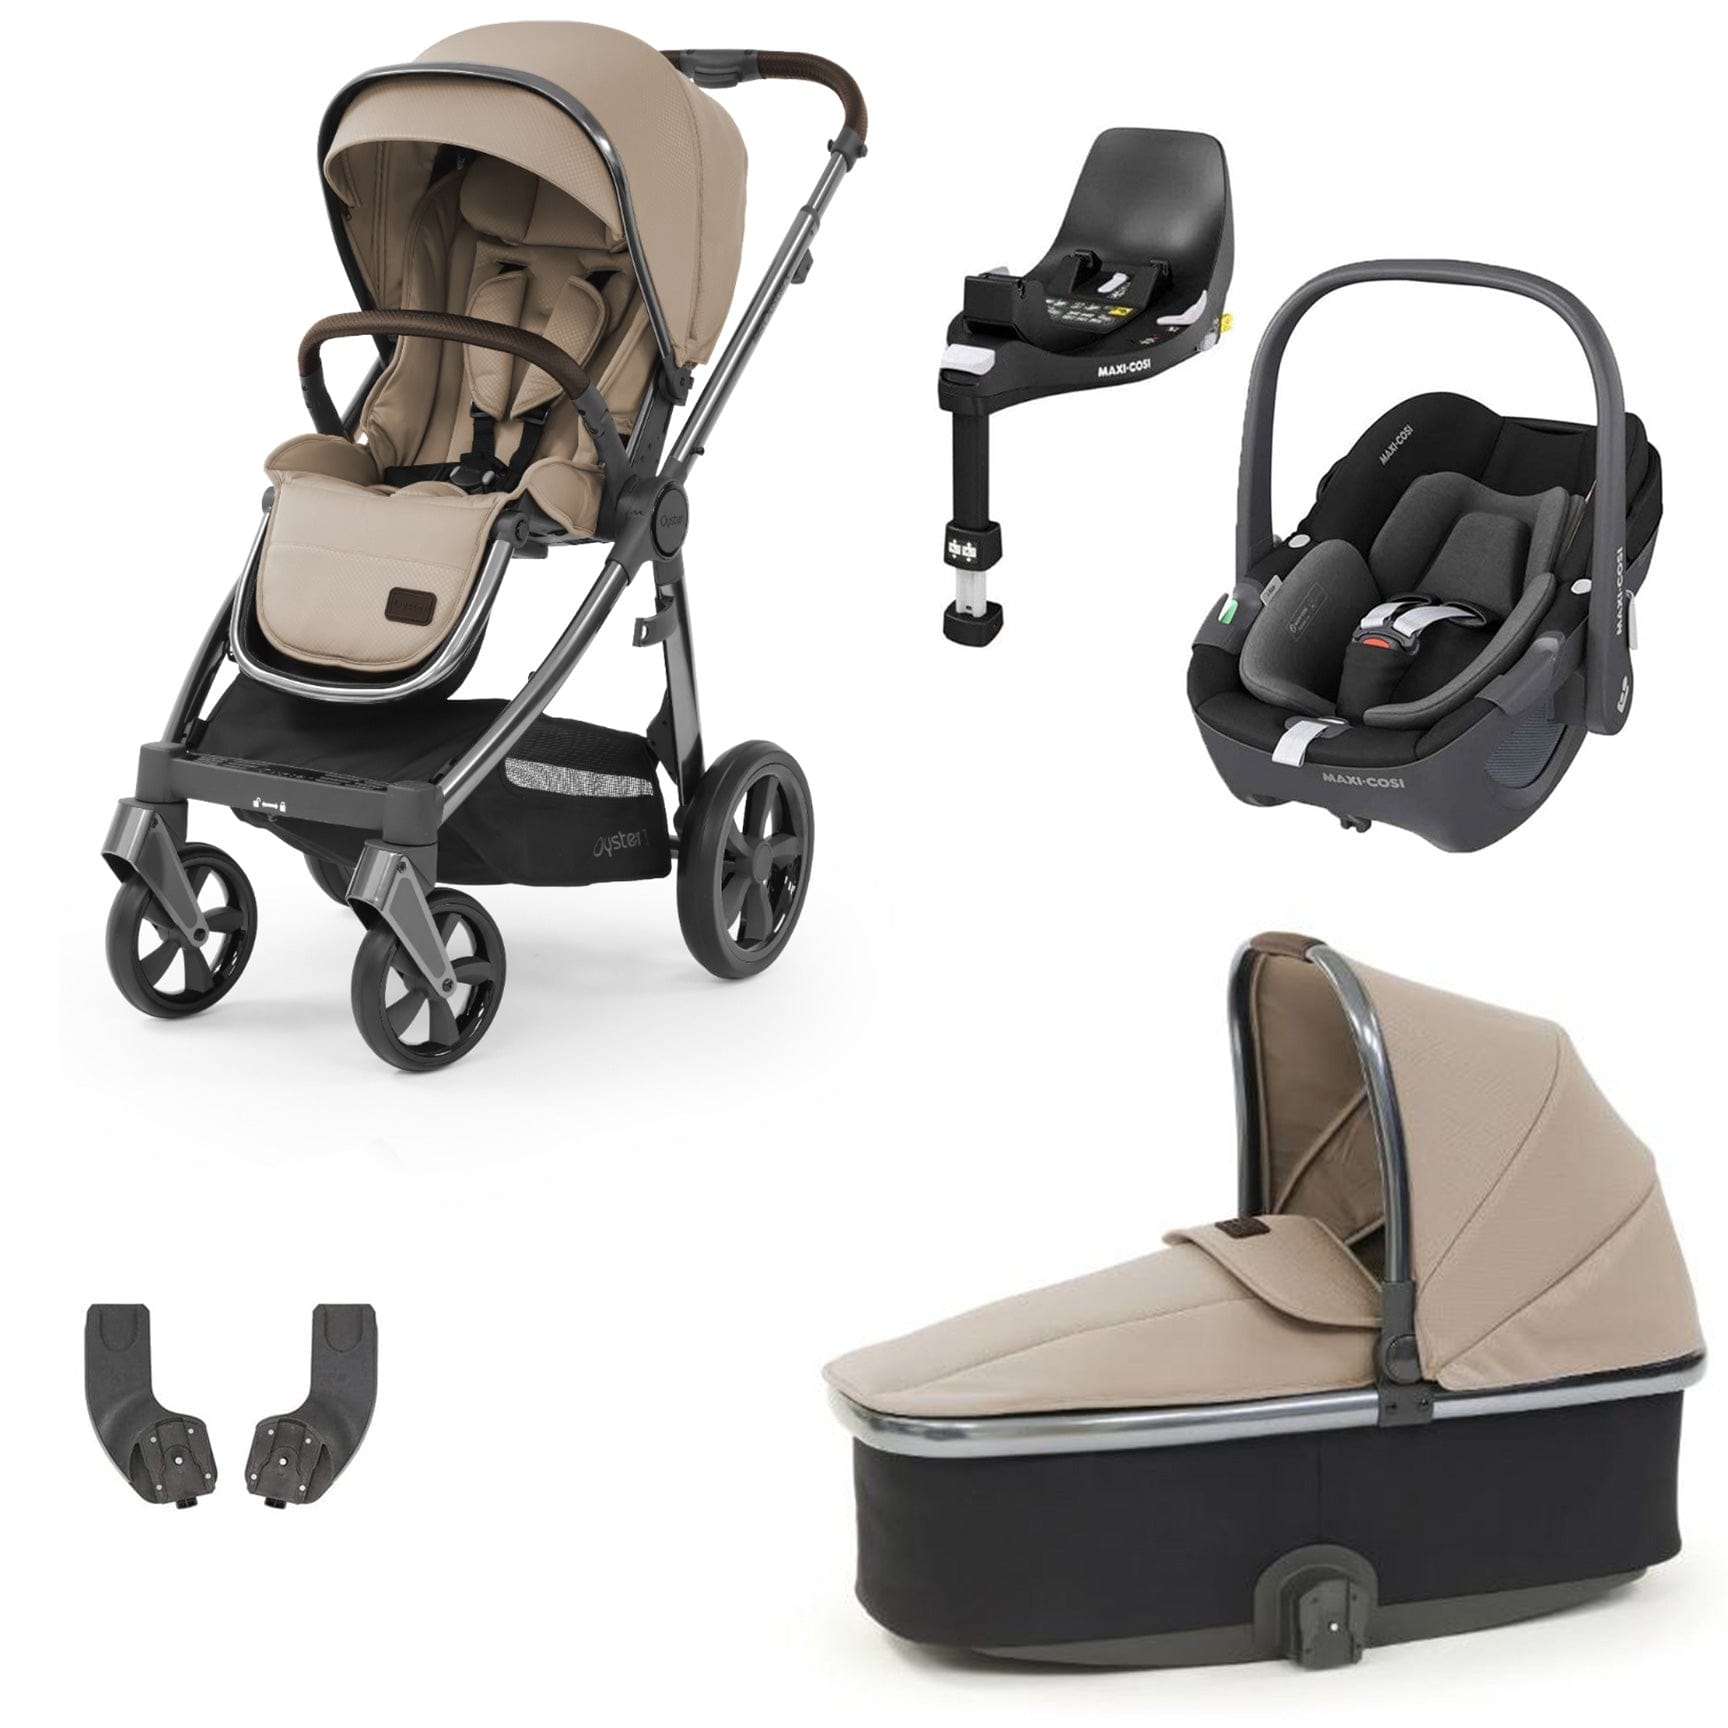 Babystyle Oyster 3 Essential Bundle with Car Seat in Butterscotch Travel Systems 9111-BTS-2 5060711564630